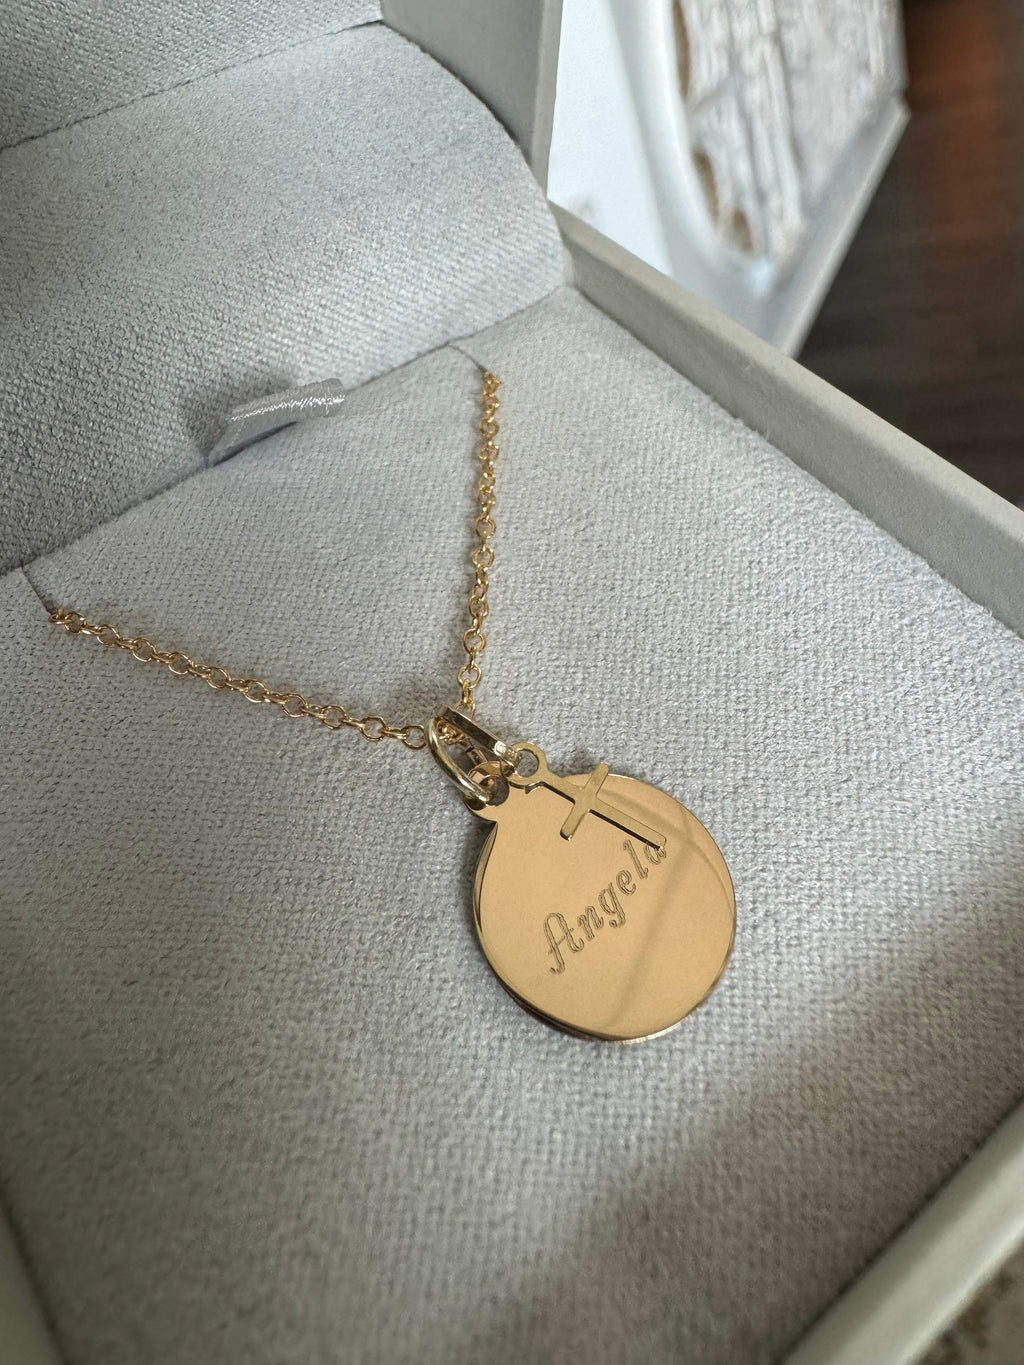 Ladies yellow gold engraved "Angela" disc with layered cross charm necklace